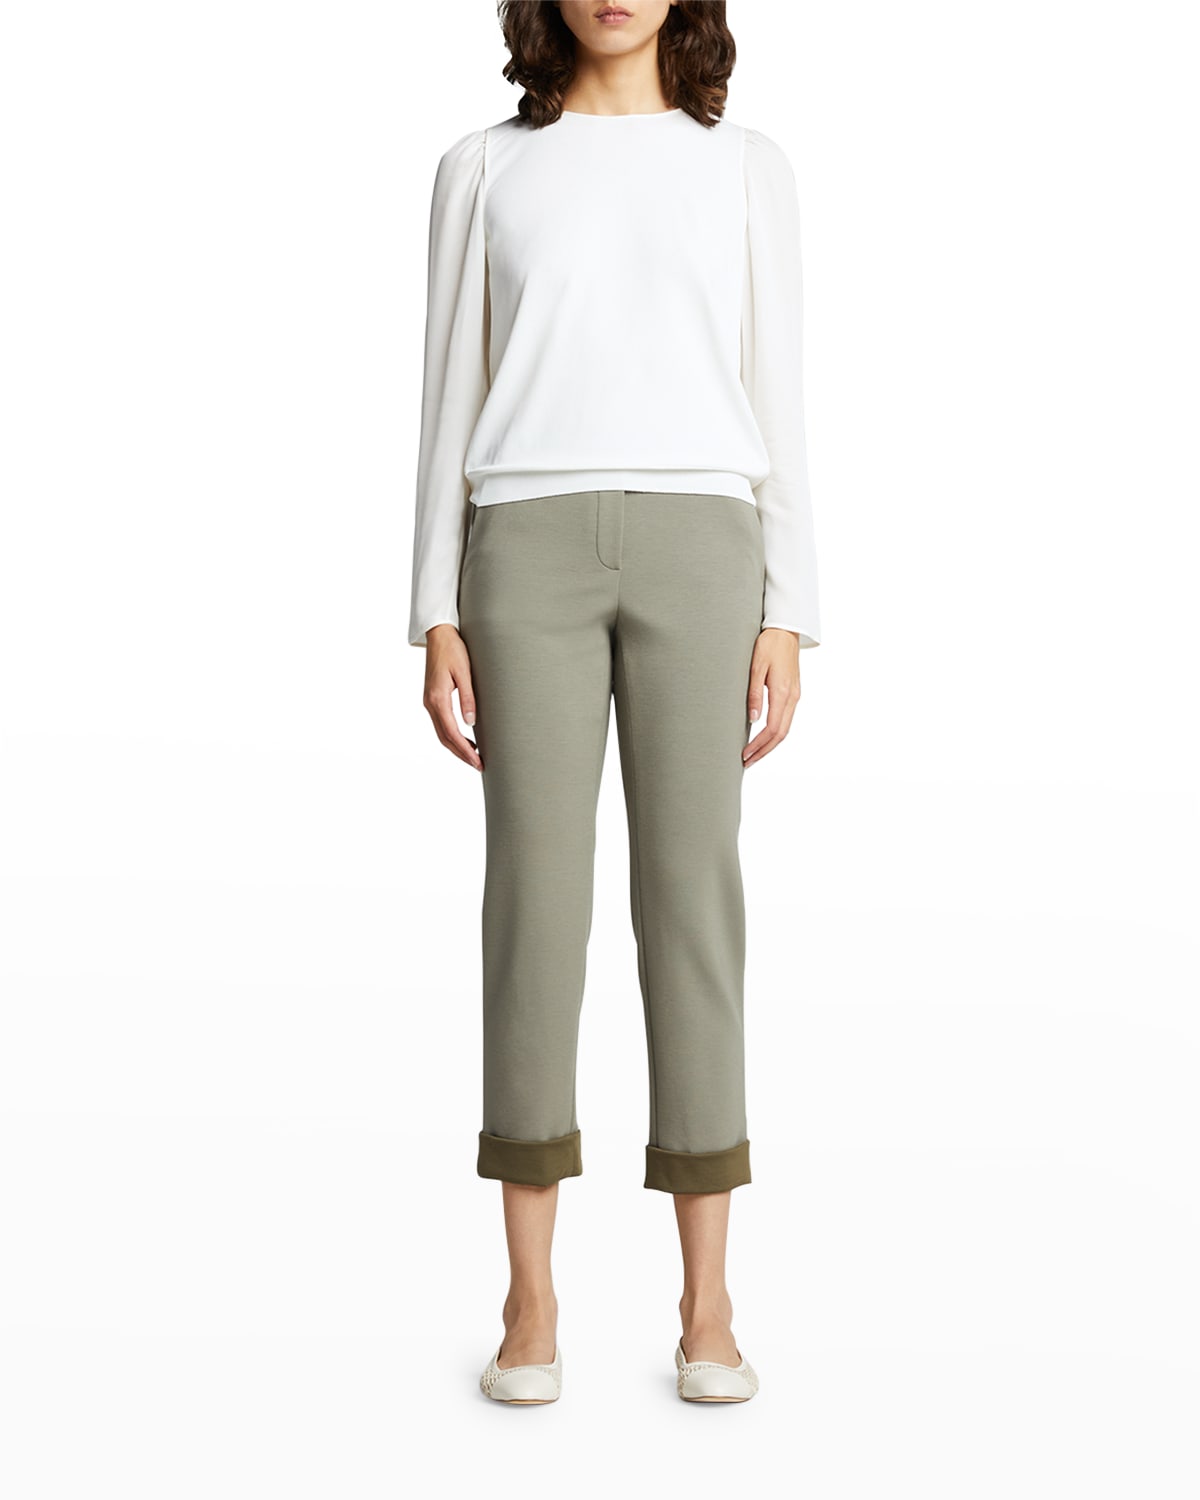 THEORY TREECA DOUBLE-KNIT PULL-ON trousers